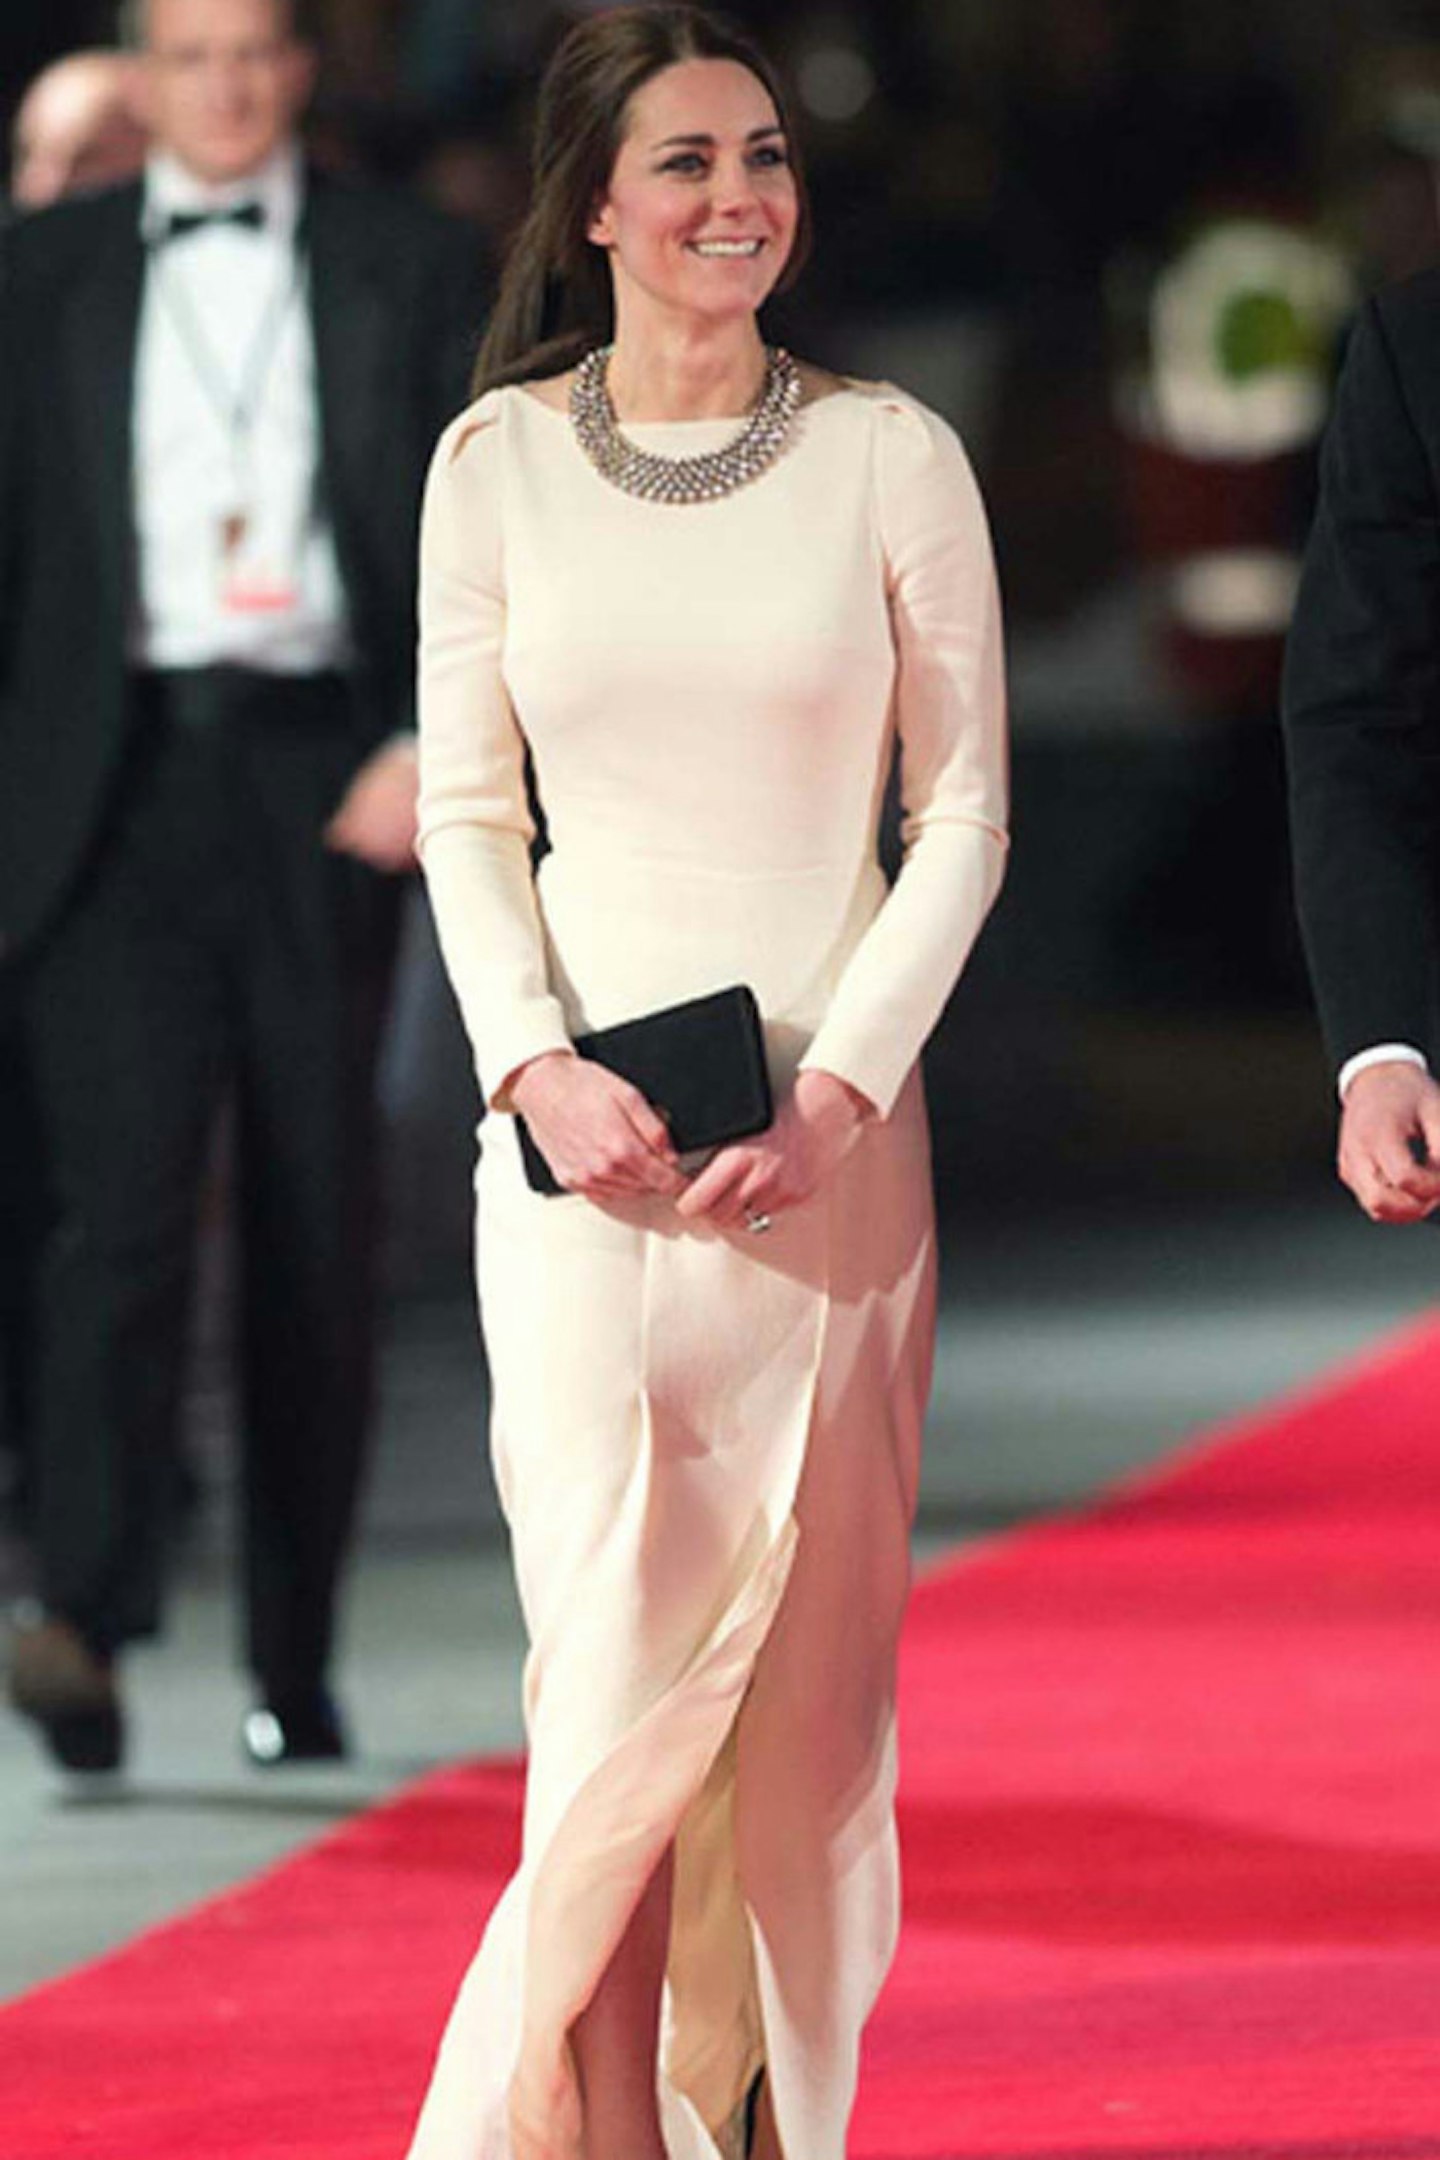 The Duchess of Cambridge in a Roland Mouret dress at the Nelson Mandela premiere, 5 December 2013